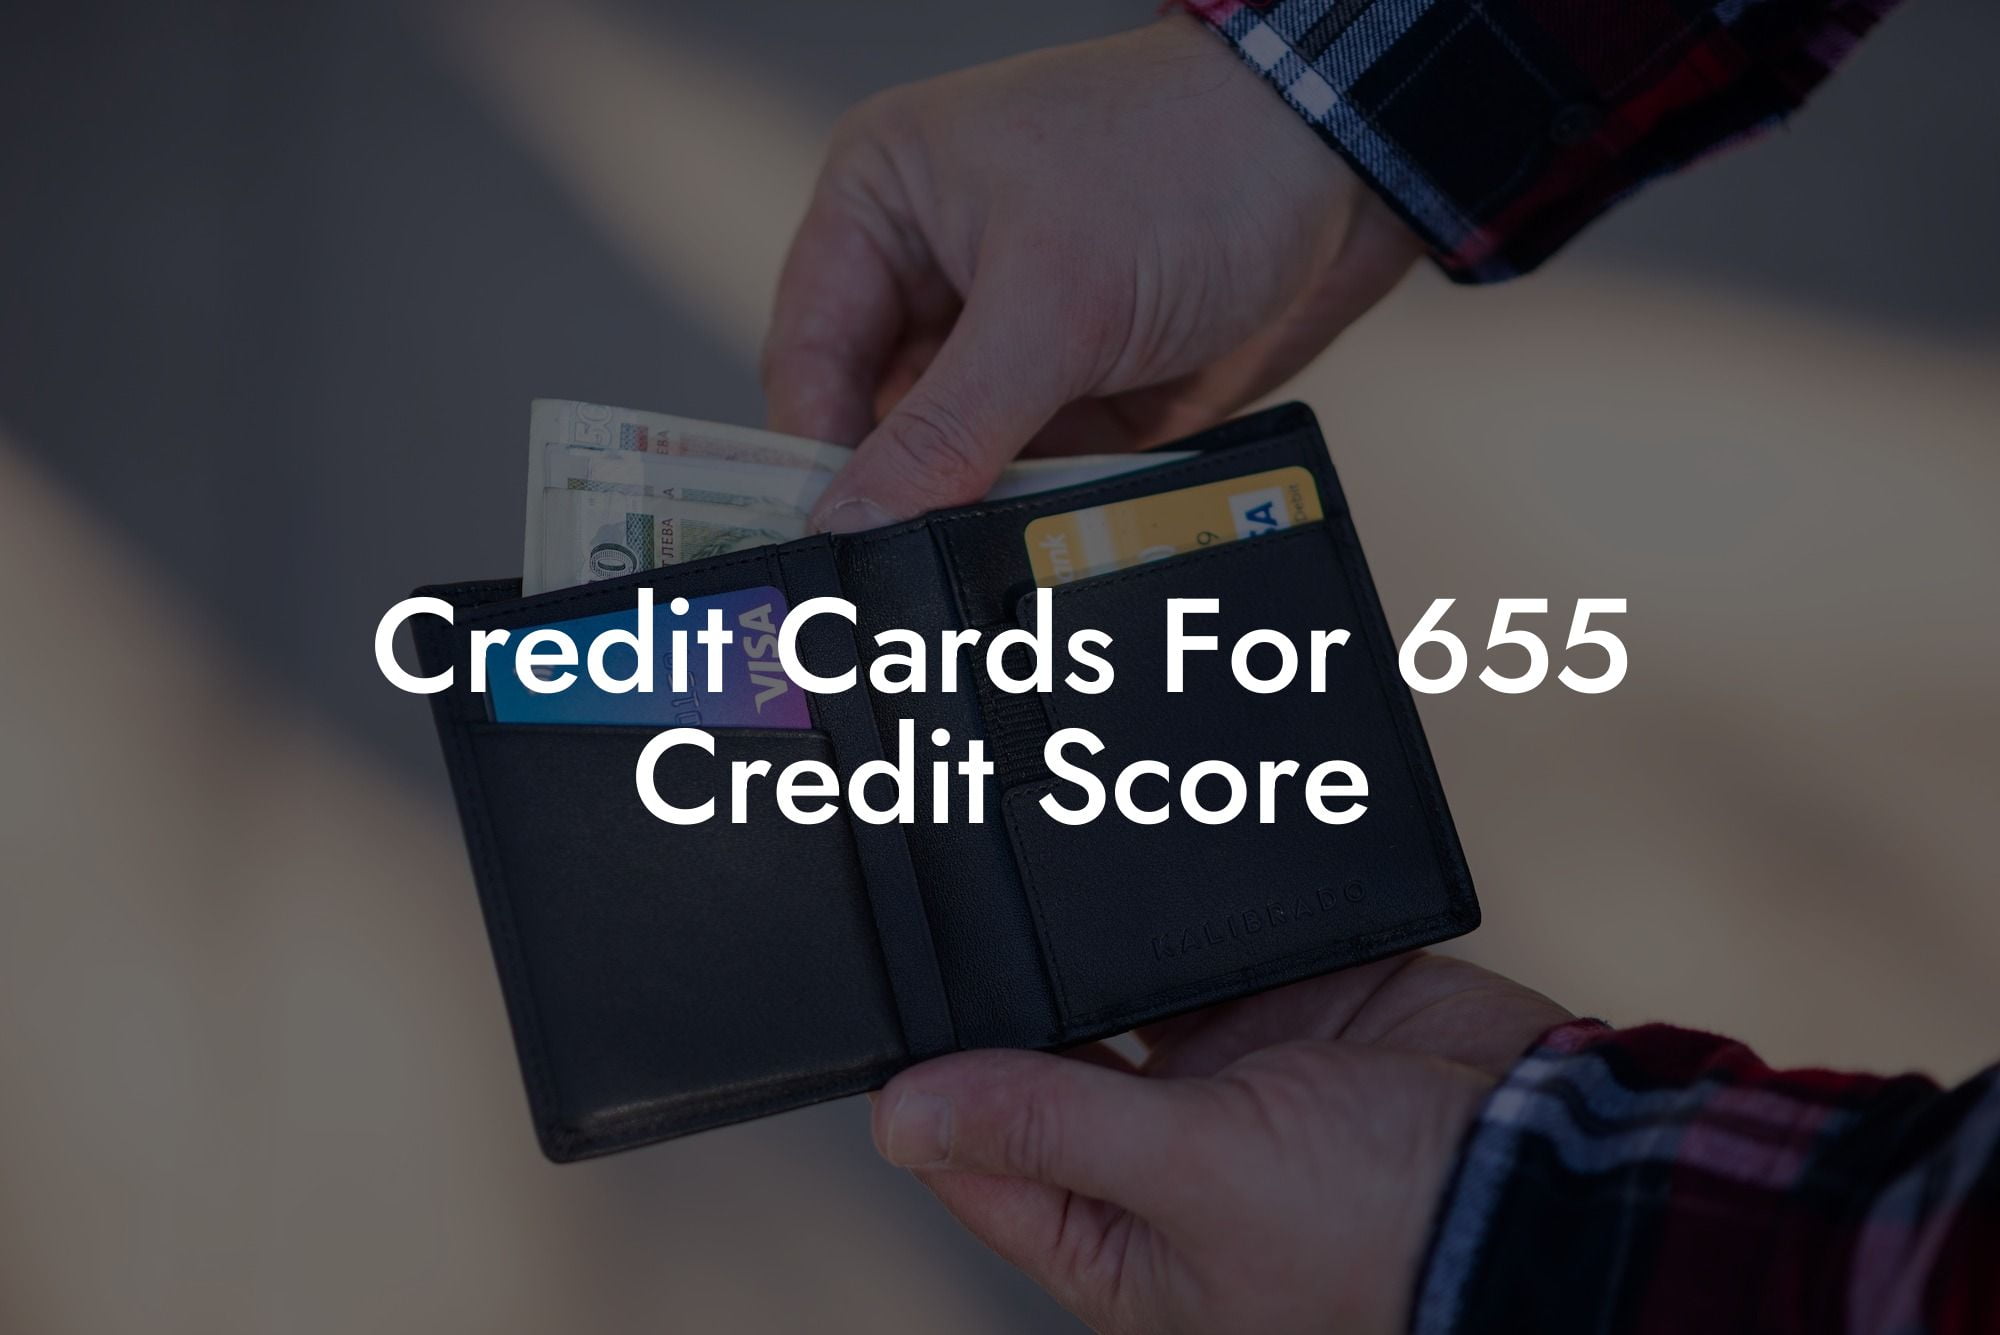 Credit Cards For 655 Credit Score